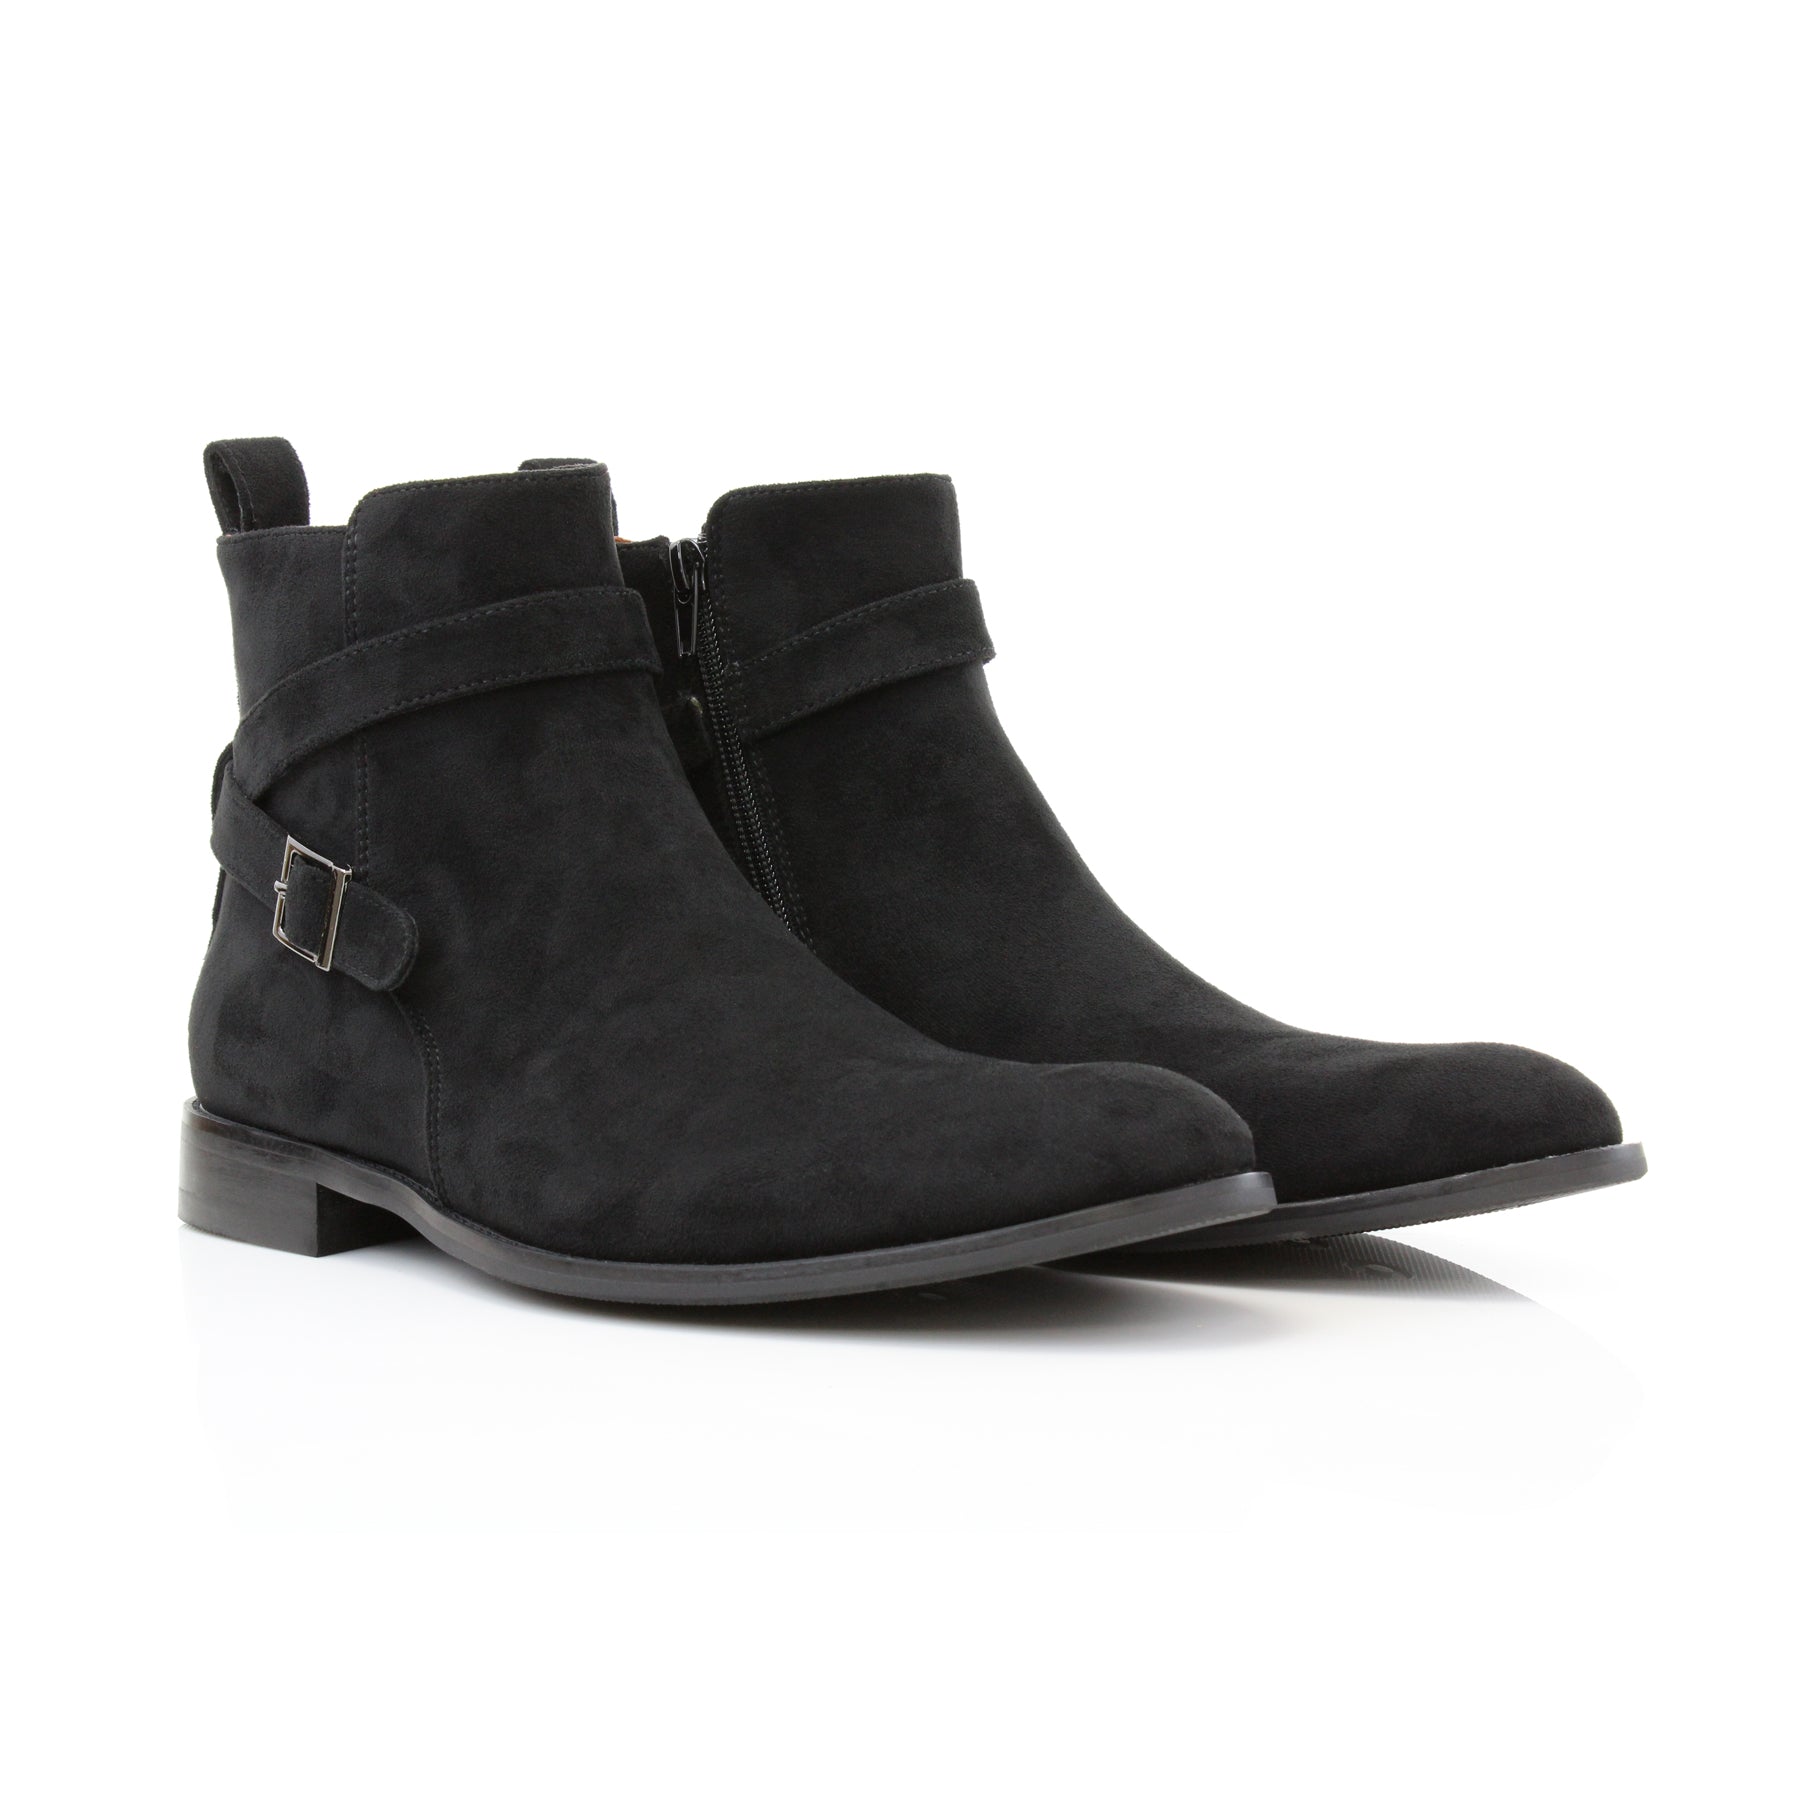 Strapped Suede Chelsea Boots | Derrick by Polar Fox | Conal Footwear | Paired Angle View